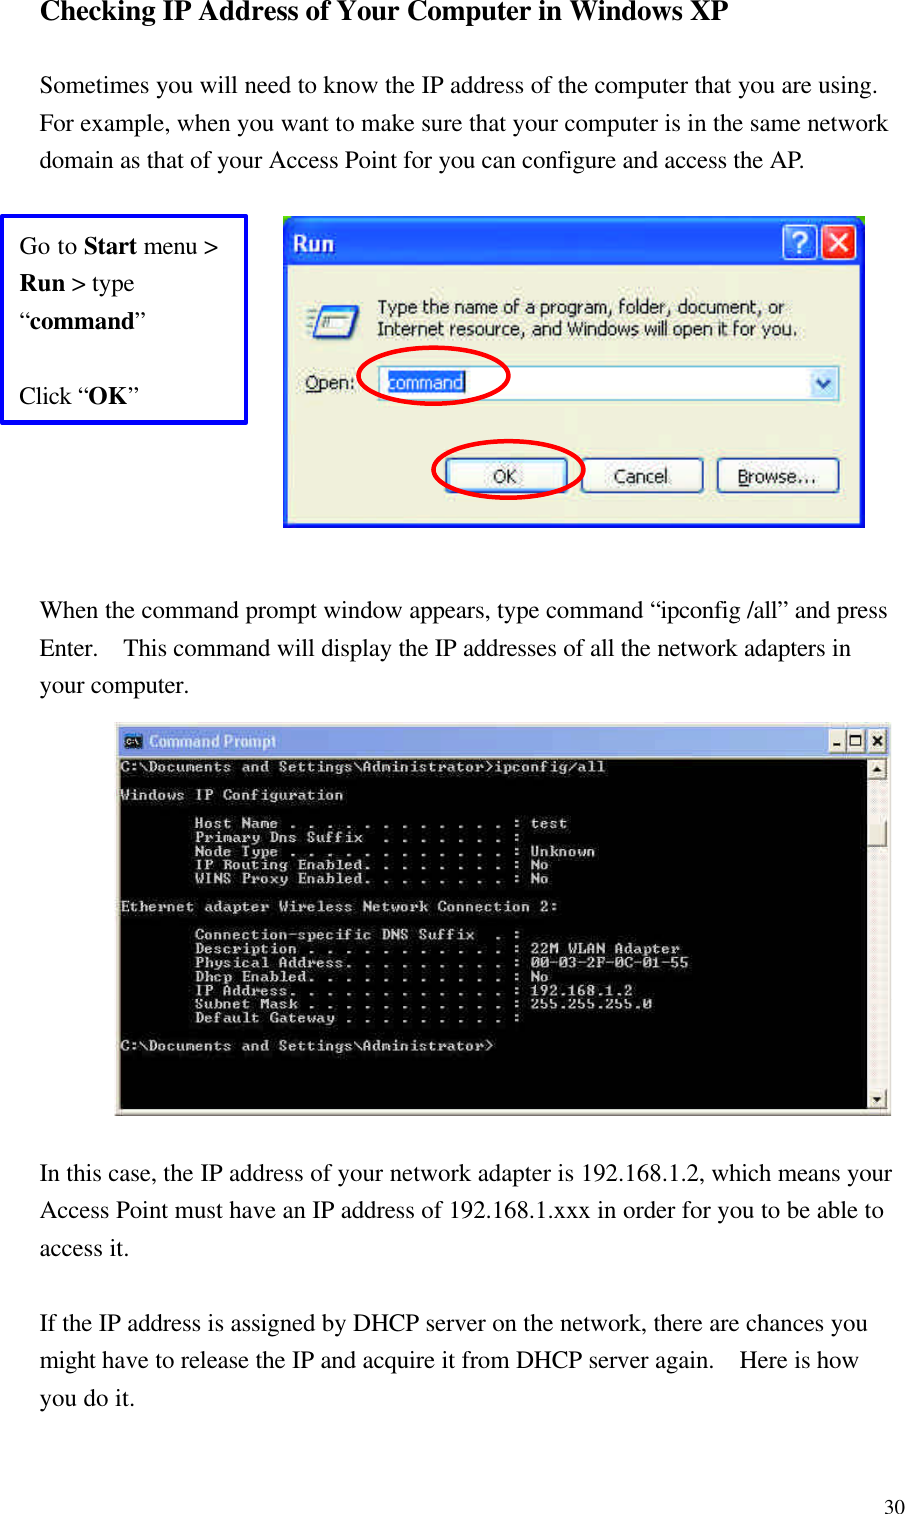  30Checking IP Address of Your Computer in Windows XP  Sometimes you will need to know the IP address of the computer that you are using.  For example, when you want to make sure that your computer is in the same network domain as that of your Access Point for you can configure and access the AP.            When the command prompt window appears, type command “ipconfig /all” and press Enter.  This command will display the IP addresses of all the network adapters in your computer.             In this case, the IP address of your network adapter is 192.168.1.2, which means your Access Point must have an IP address of 192.168.1.xxx in order for you to be able to access it.  If the IP address is assigned by DHCP server on the network, there are chances you might have to release the IP and acquire it from DHCP server again.   Here is how you do it. Go to Start menu &gt; Run &gt; type “command”  Click “OK” 